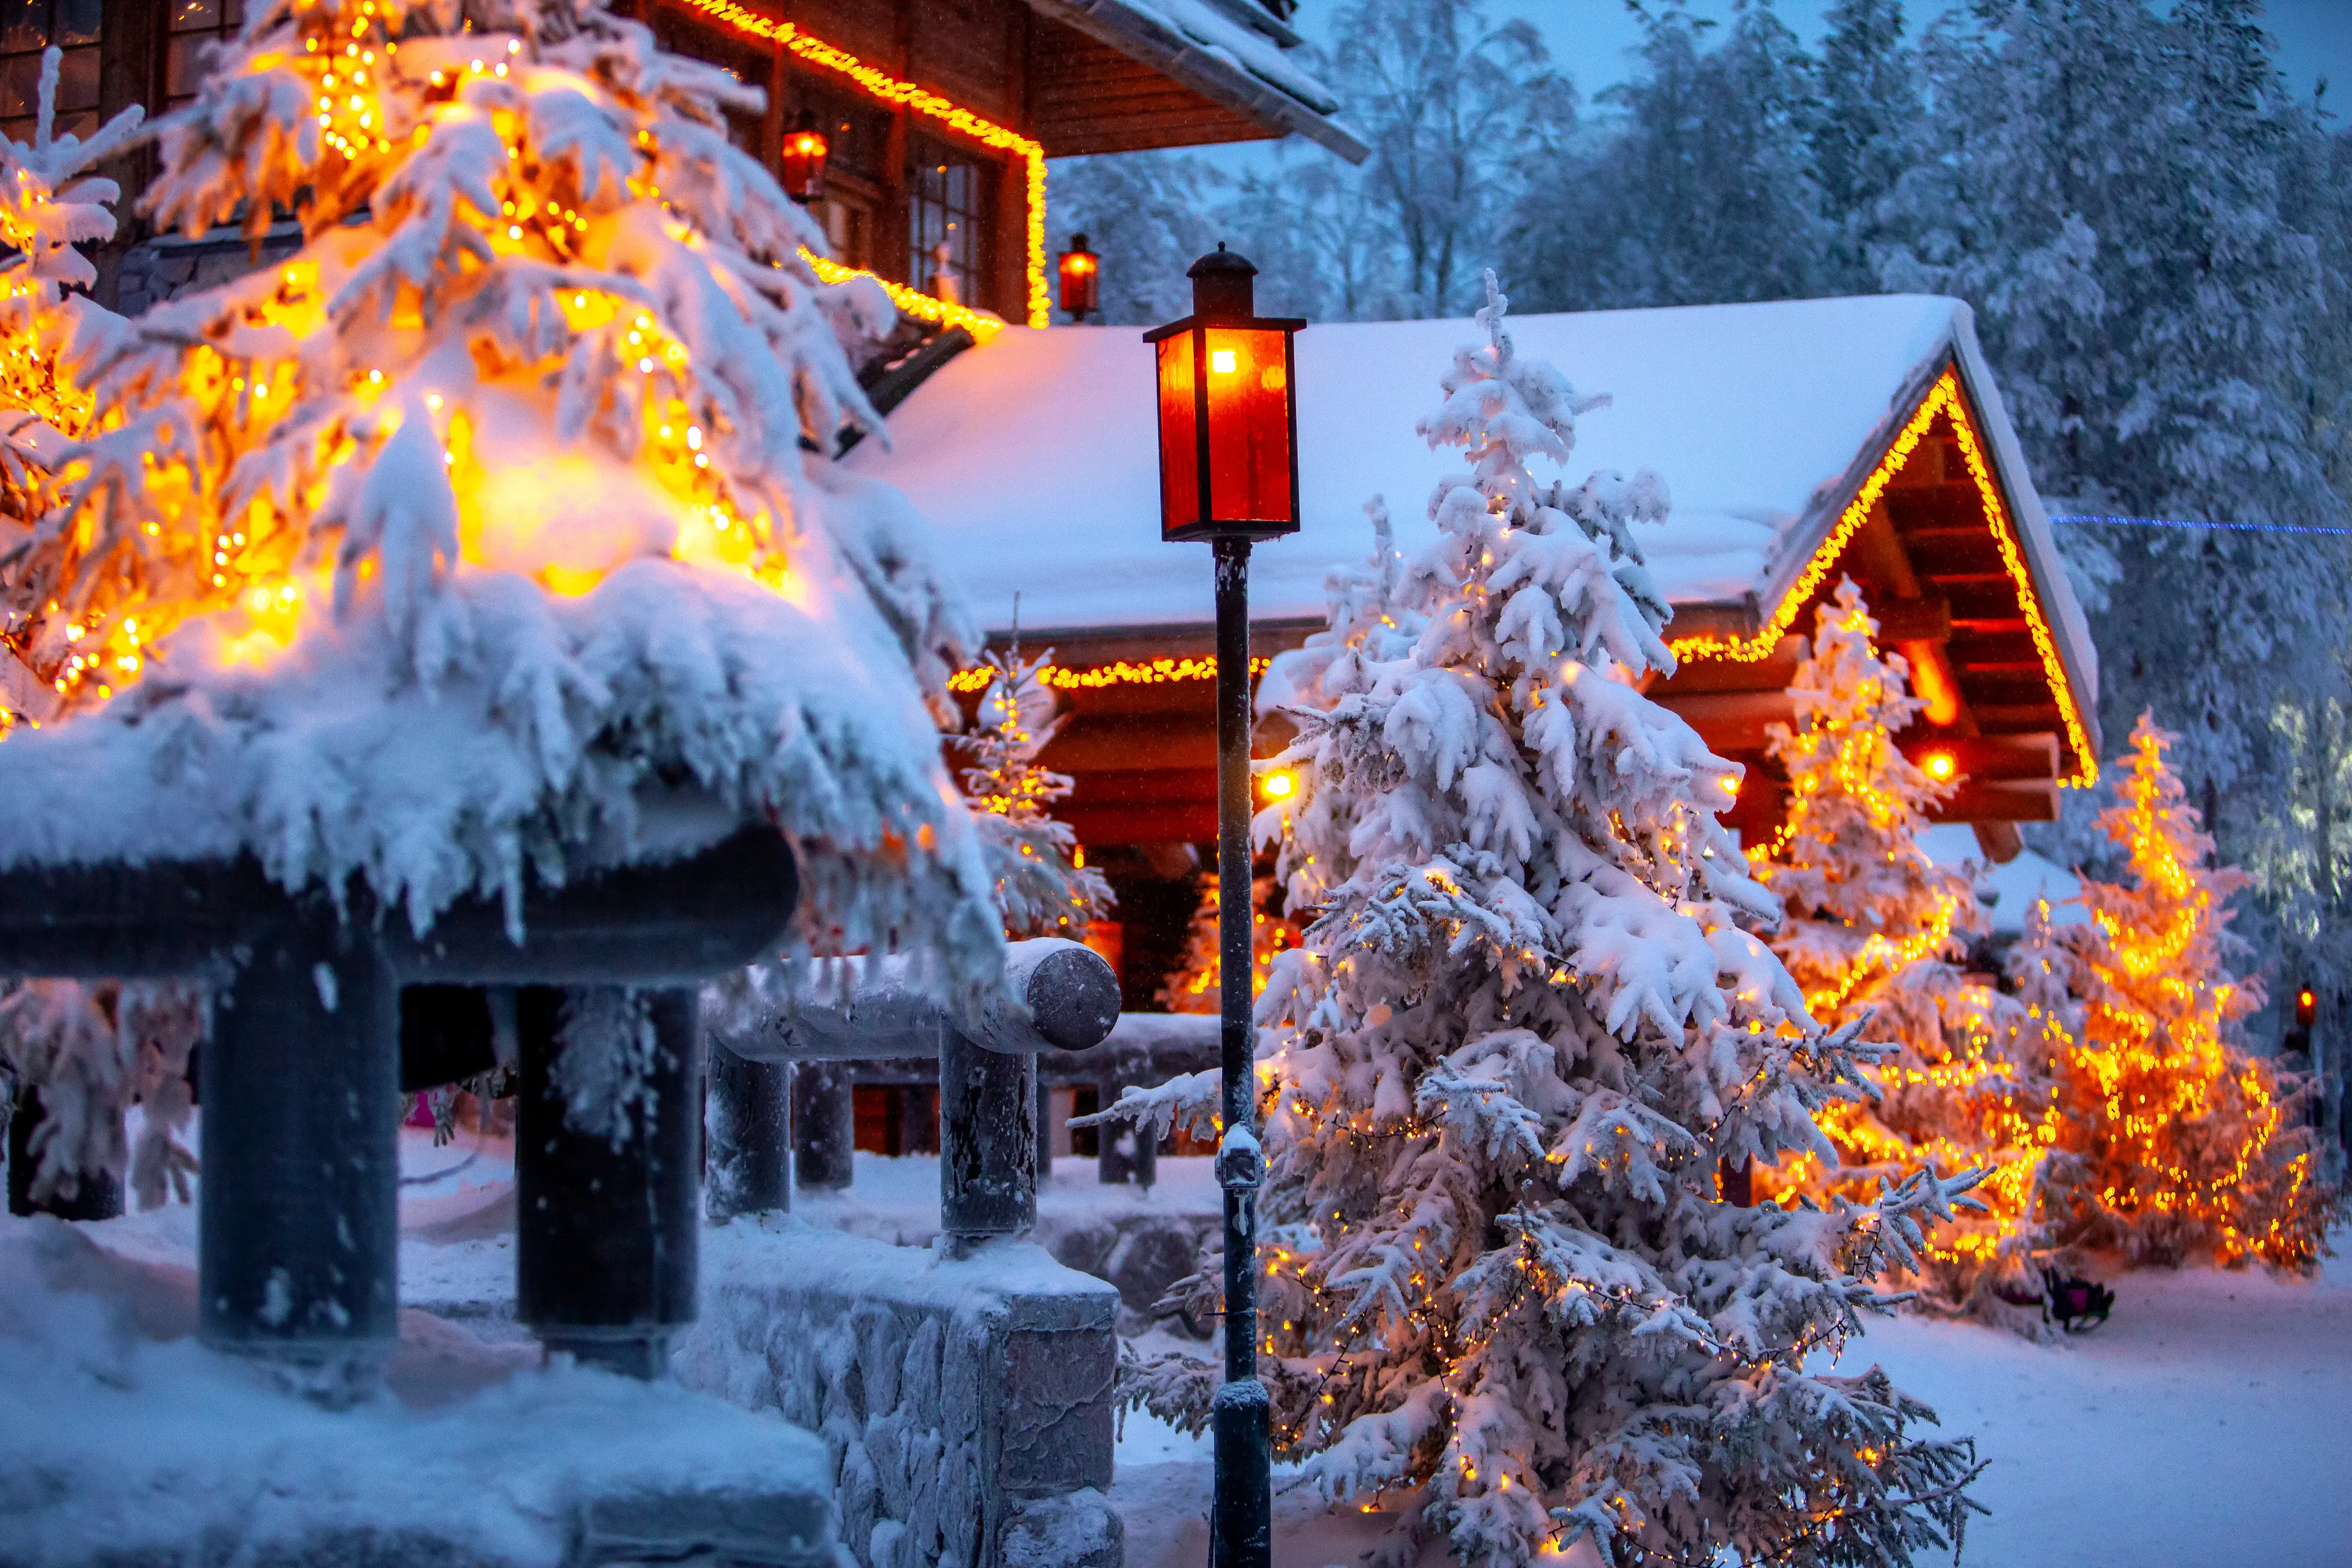 3-Day Magical Christmas Holiday Itinerary in Rovaniemi, Finland